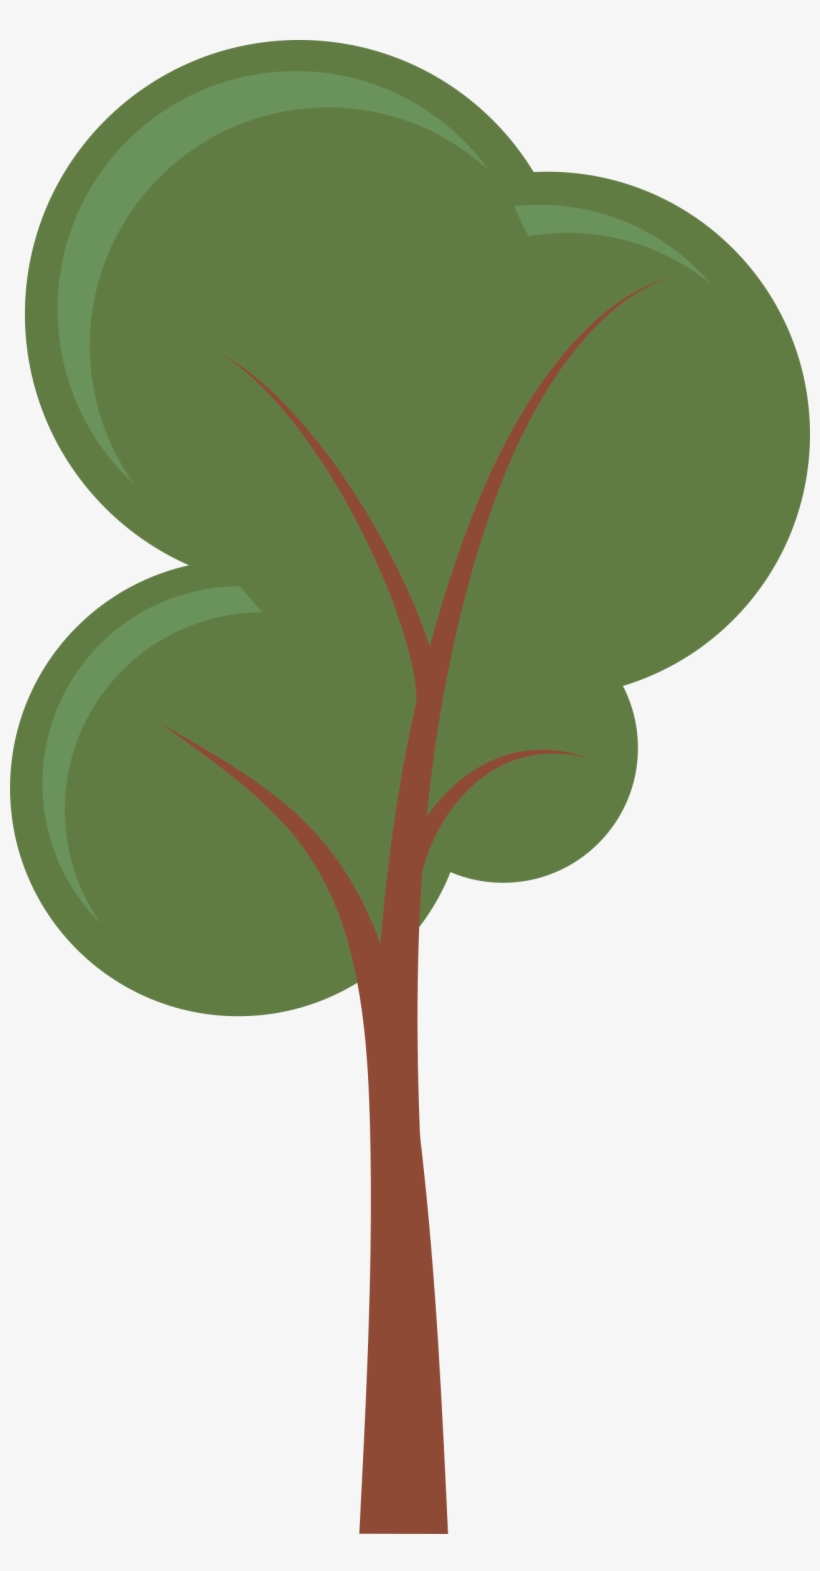 Transparent Tree Flower Cartoons Pictures Png Transparent - Cartoon Tree Transparent Png, transparent png #1761454